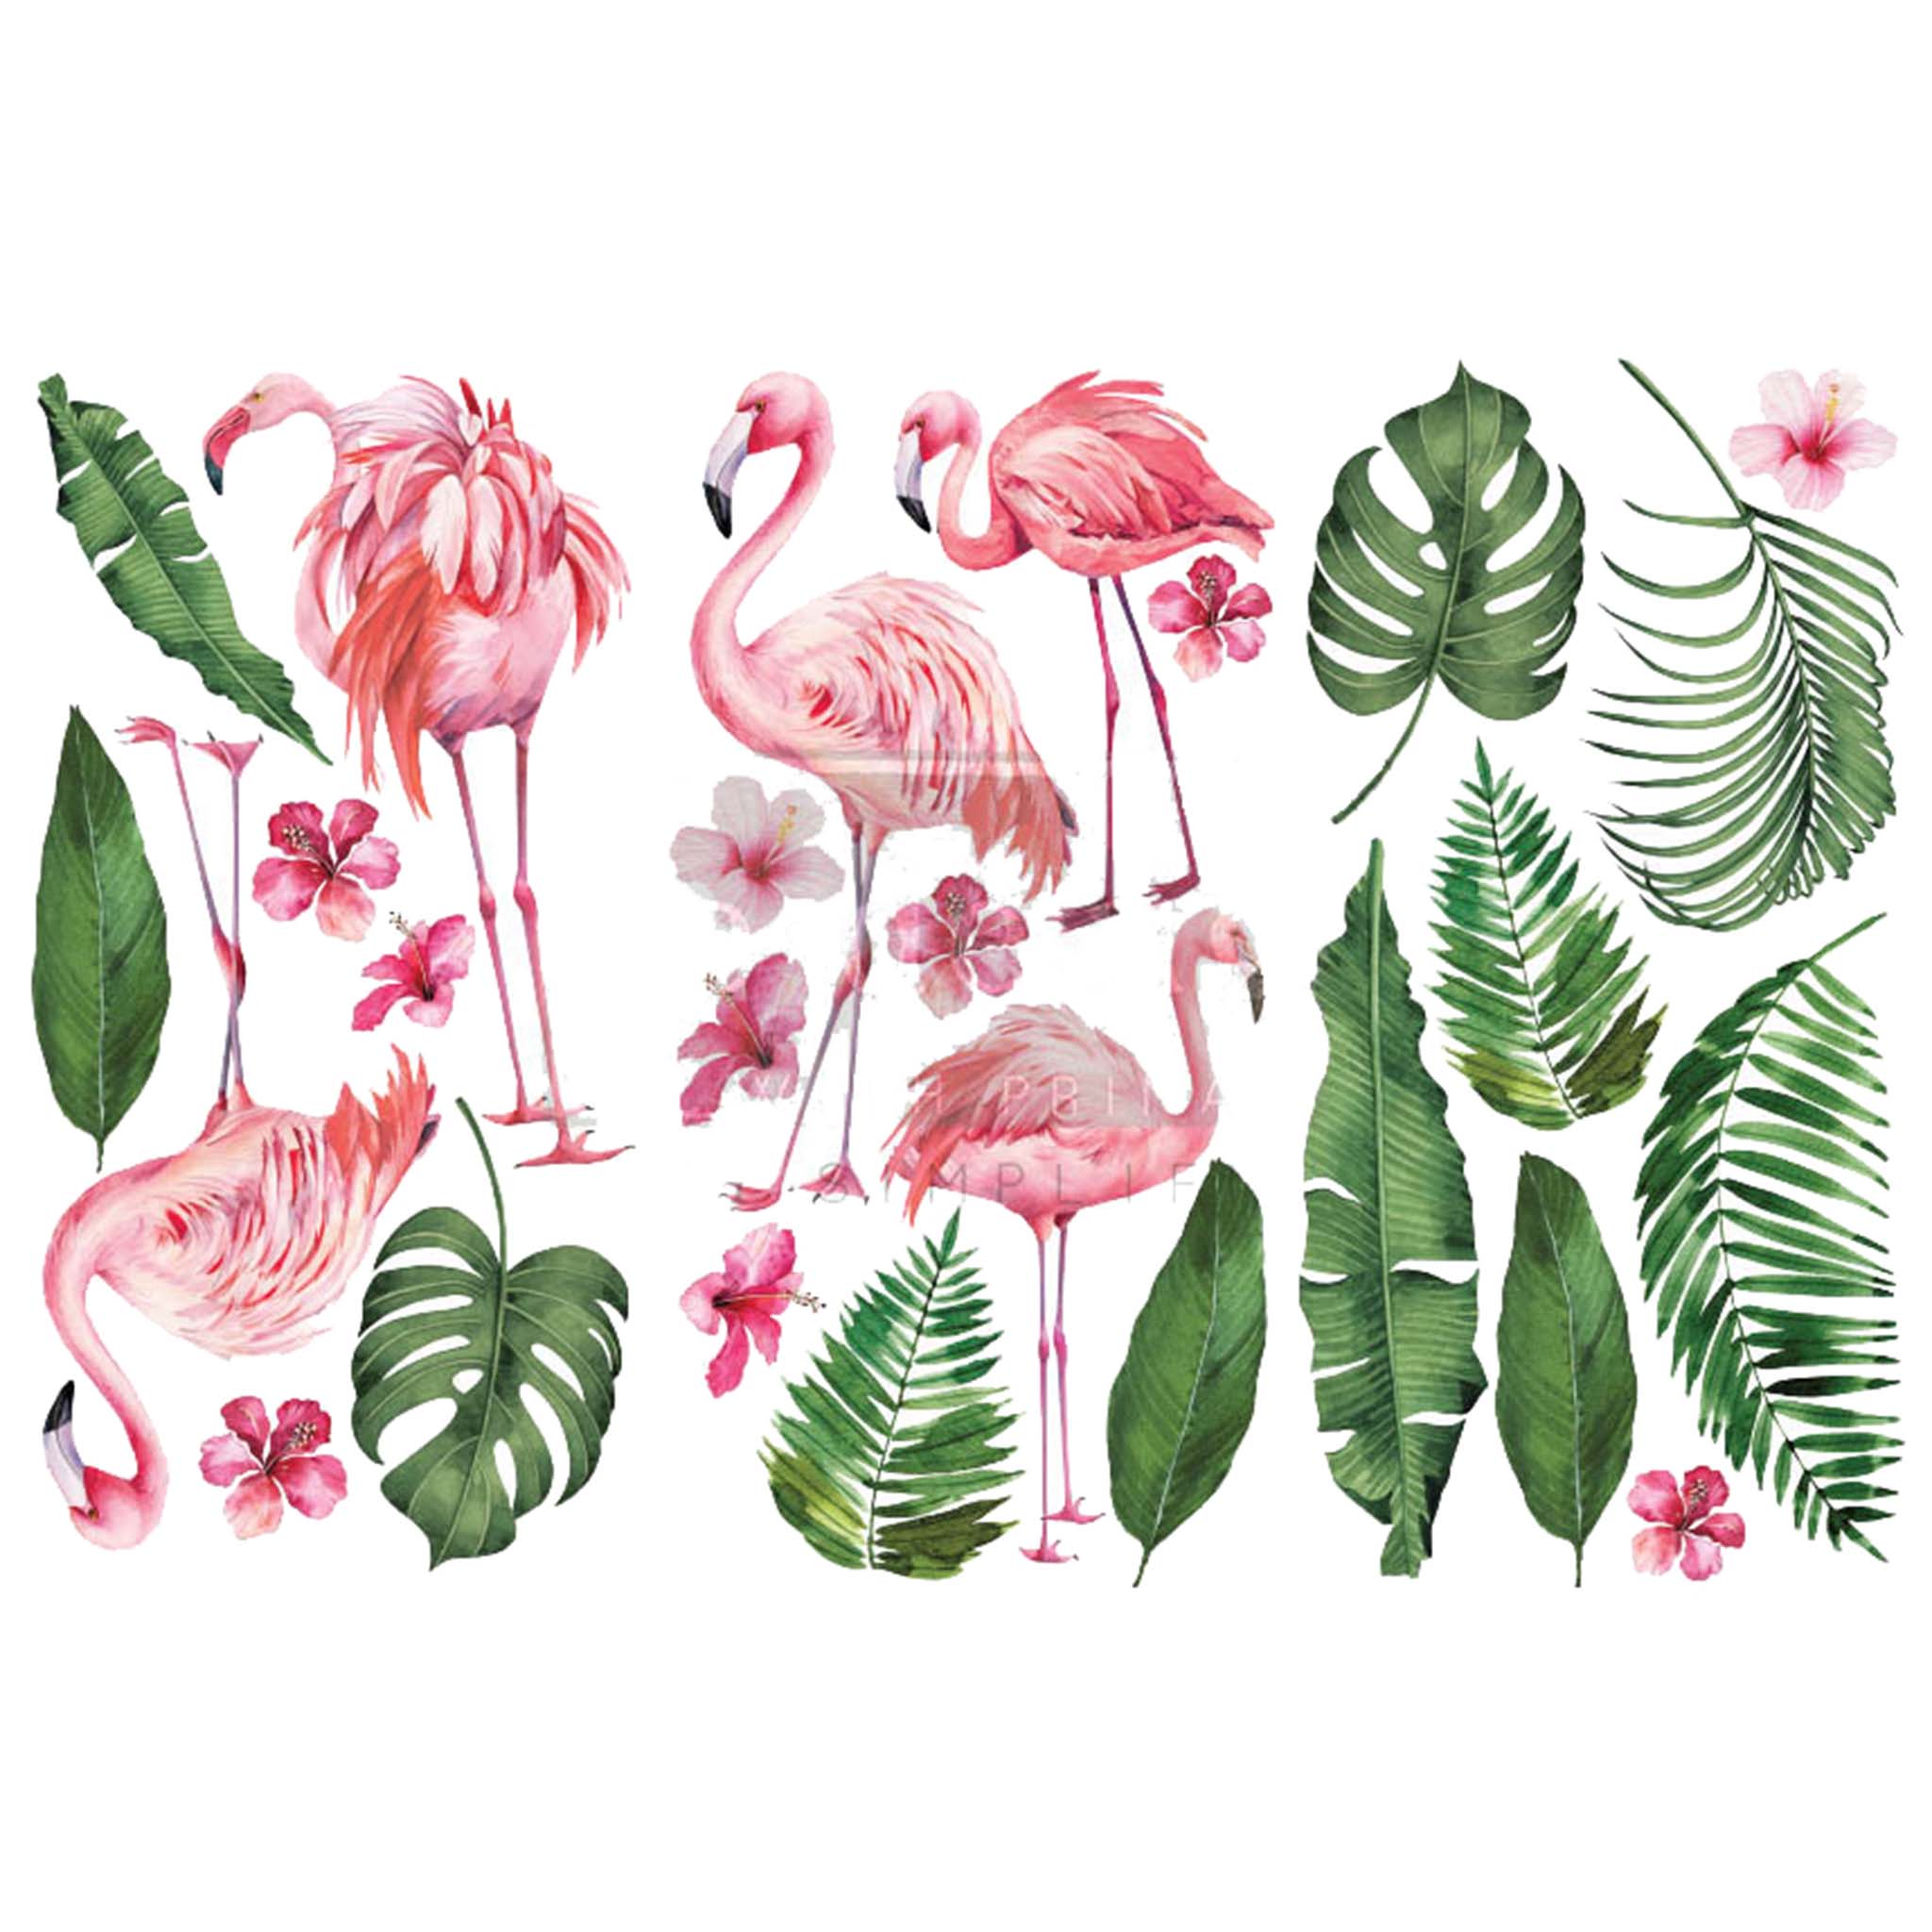 Small rub-on transfers of pink flamingoes, pink flowers and palm leaves. A white border is on the top and bottom.